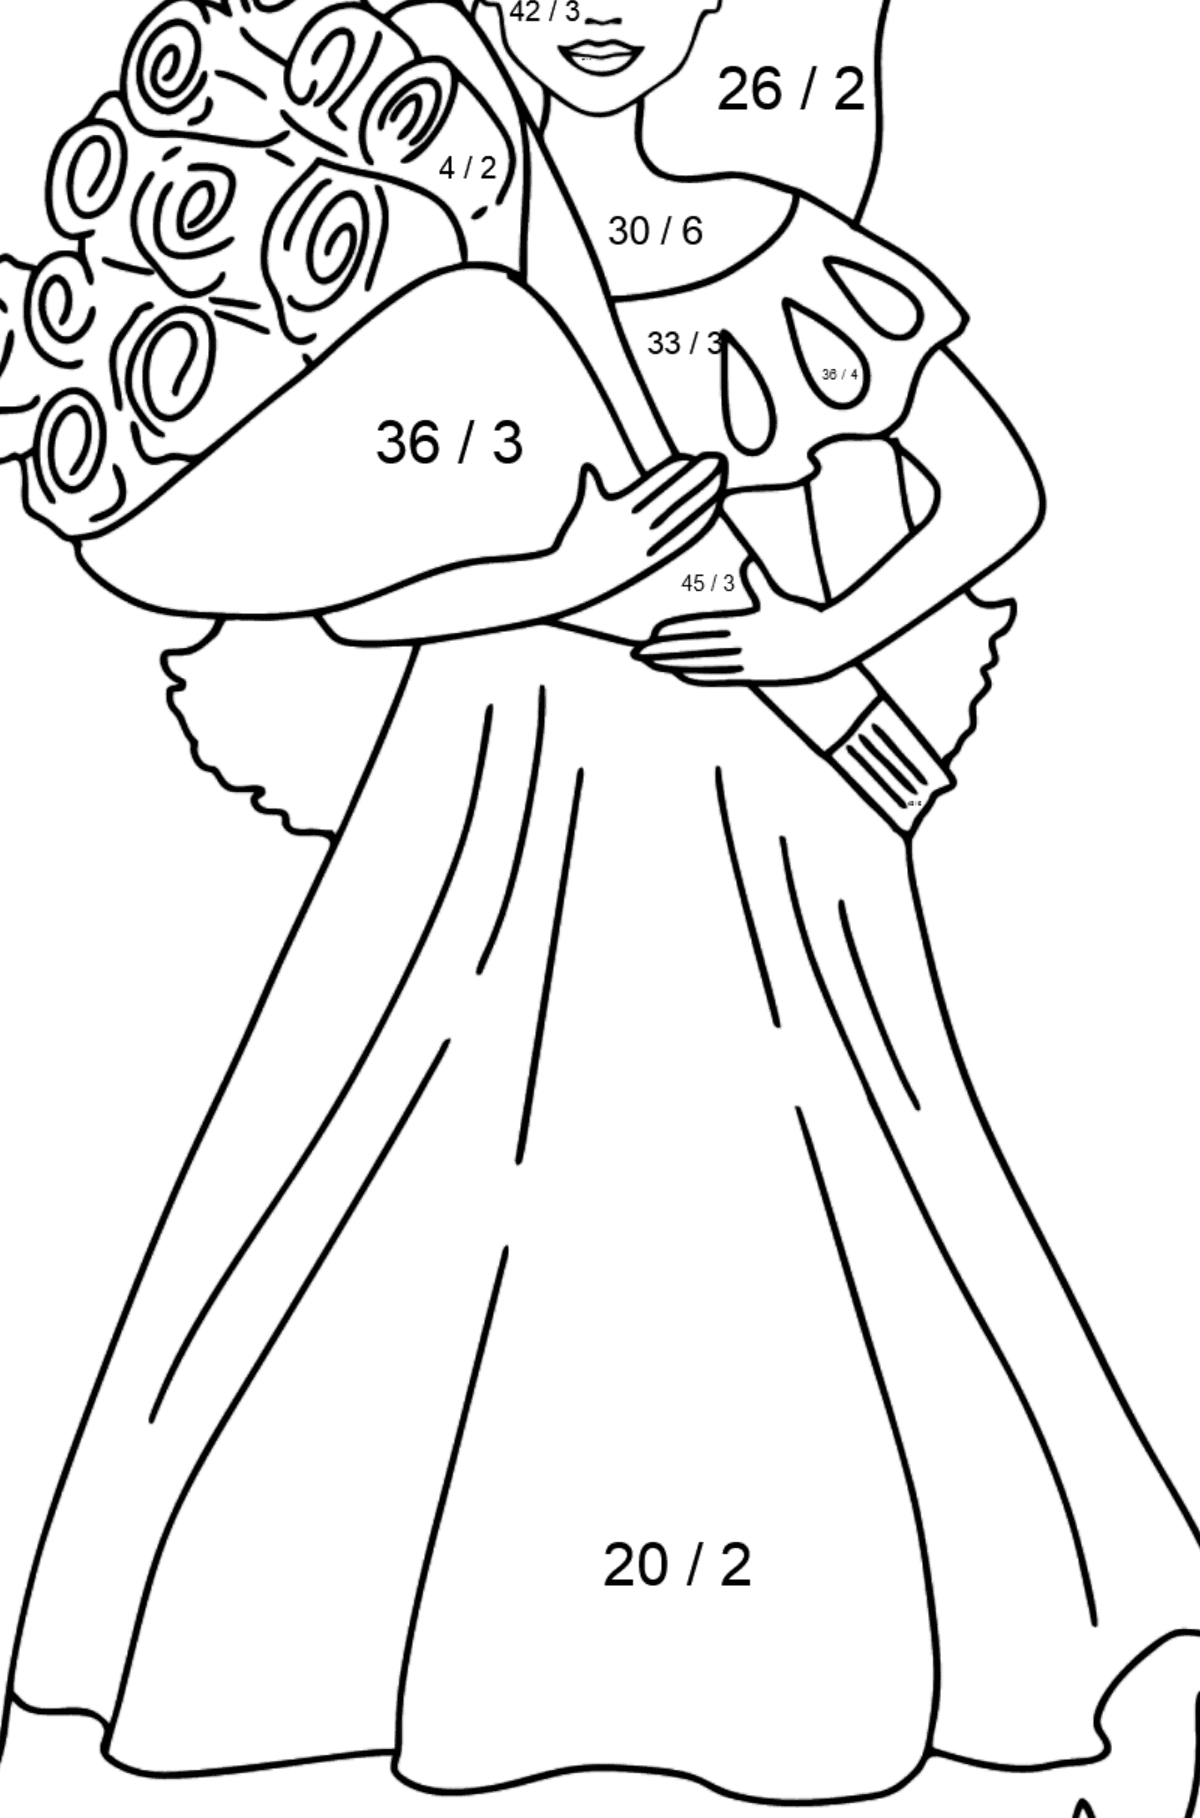 Barbie Doll and a Bouquet of Roses coloring page - Math Coloring - Division for Kids